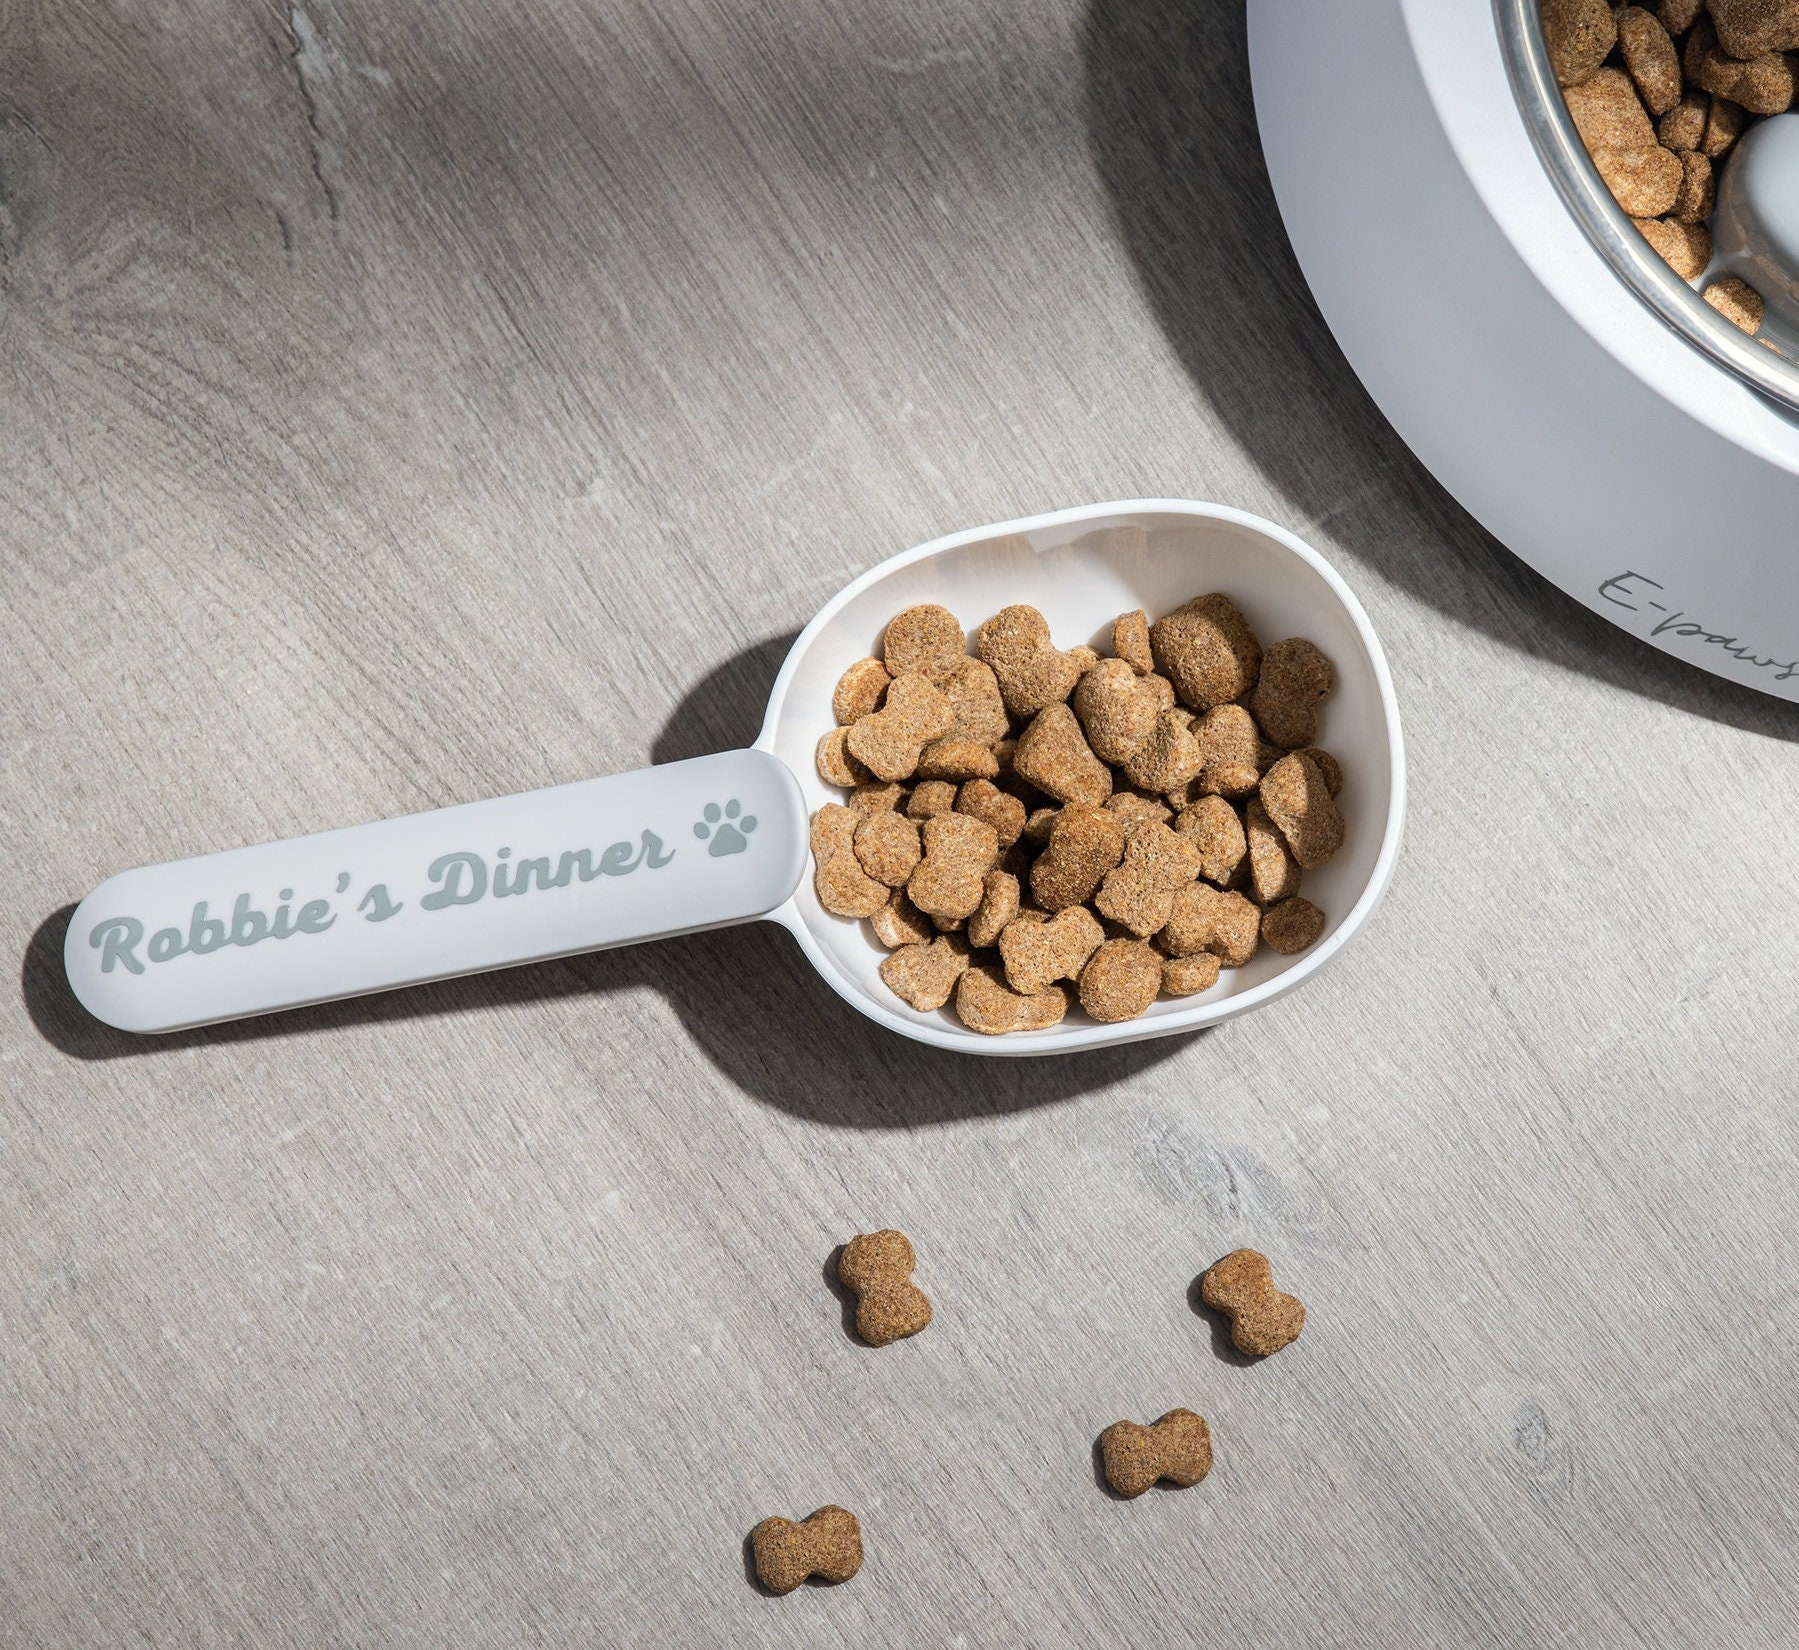 Personalized Pet Food Bag Clips